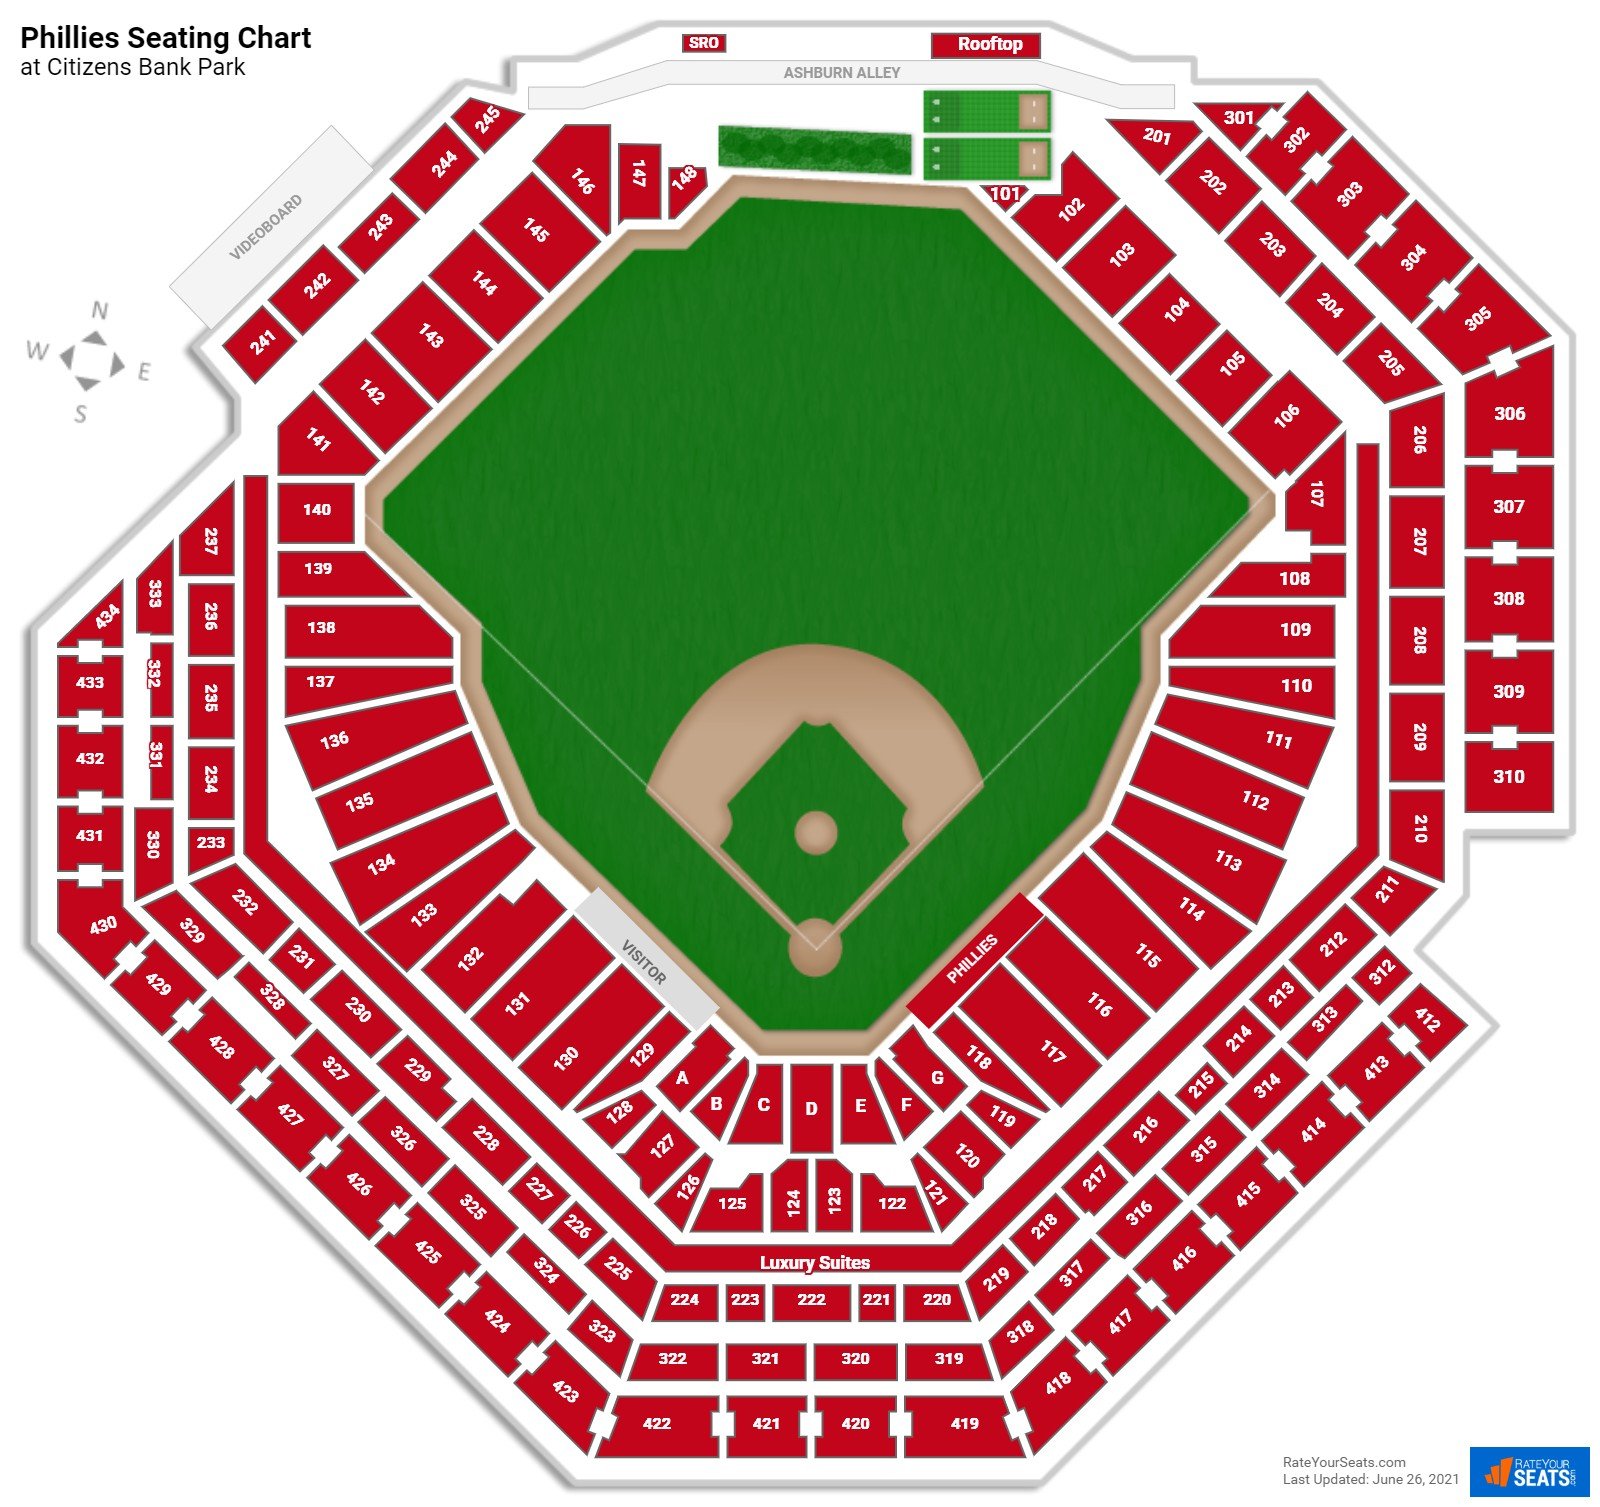 Philadelphia Phillies Seating Chart at Citizens Bank Park